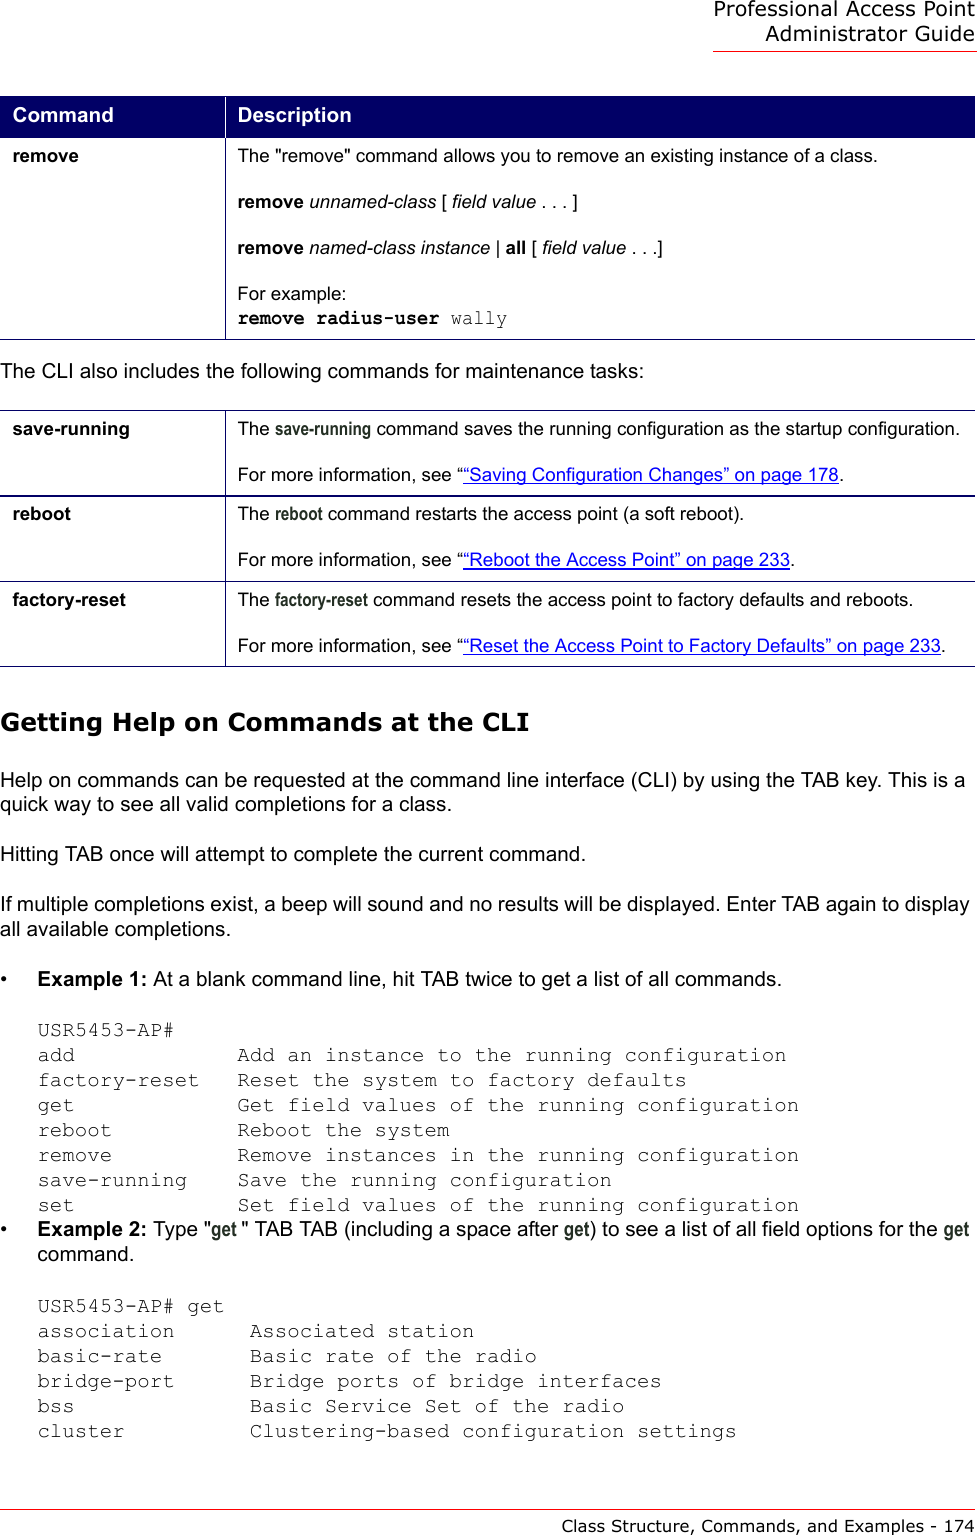 Professional Access Point Administrator GuideClass Structure, Commands, and Examples - 174The CLI also includes the following commands for maintenance tasks:Getting Help on Commands at the CLIHelp on commands can be requested at the command line interface (CLI) by using the TAB key. This is a quick way to see all valid completions for a class.Hitting TAB once will attempt to complete the current command.If multiple completions exist, a beep will sound and no results will be displayed. Enter TAB again to display all available completions.•Example 1: At a blank command line, hit TAB twice to get a list of all commands.USR5453-AP#add             Add an instance to the running configurationfactory-reset   Reset the system to factory defaultsget             Get field values of the running configurationreboot          Reboot the systemremove          Remove instances in the running configurationsave-running    Save the running configurationset             Set field values of the running configuration•Example 2: Type &quot;get &quot; TAB TAB (including a space after get) to see a list of all field options for the get command.USR5453-AP# getassociation      Associated stationbasic-rate       Basic rate of the radiobridge-port      Bridge ports of bridge interfacesbss              Basic Service Set of the radiocluster          Clustering-based configuration settingsremove The &quot;remove&quot; command allows you to remove an existing instance of a class.remove unnamed-class [ field value . . . ]remove named-class instance | all [ field value . . .]For example: remove radius-user wallysave-running The save-running command saves the running configuration as the startup configuration.For more information, see ““Saving Configuration Changes” on page 178.reboot The reboot command restarts the access point (a soft reboot).For more information, see ““Reboot the Access Point” on page 233.factory-reset The factory-reset command resets the access point to factory defaults and reboots.For more information, see ““Reset the Access Point to Factory Defaults” on page 233.Command Description